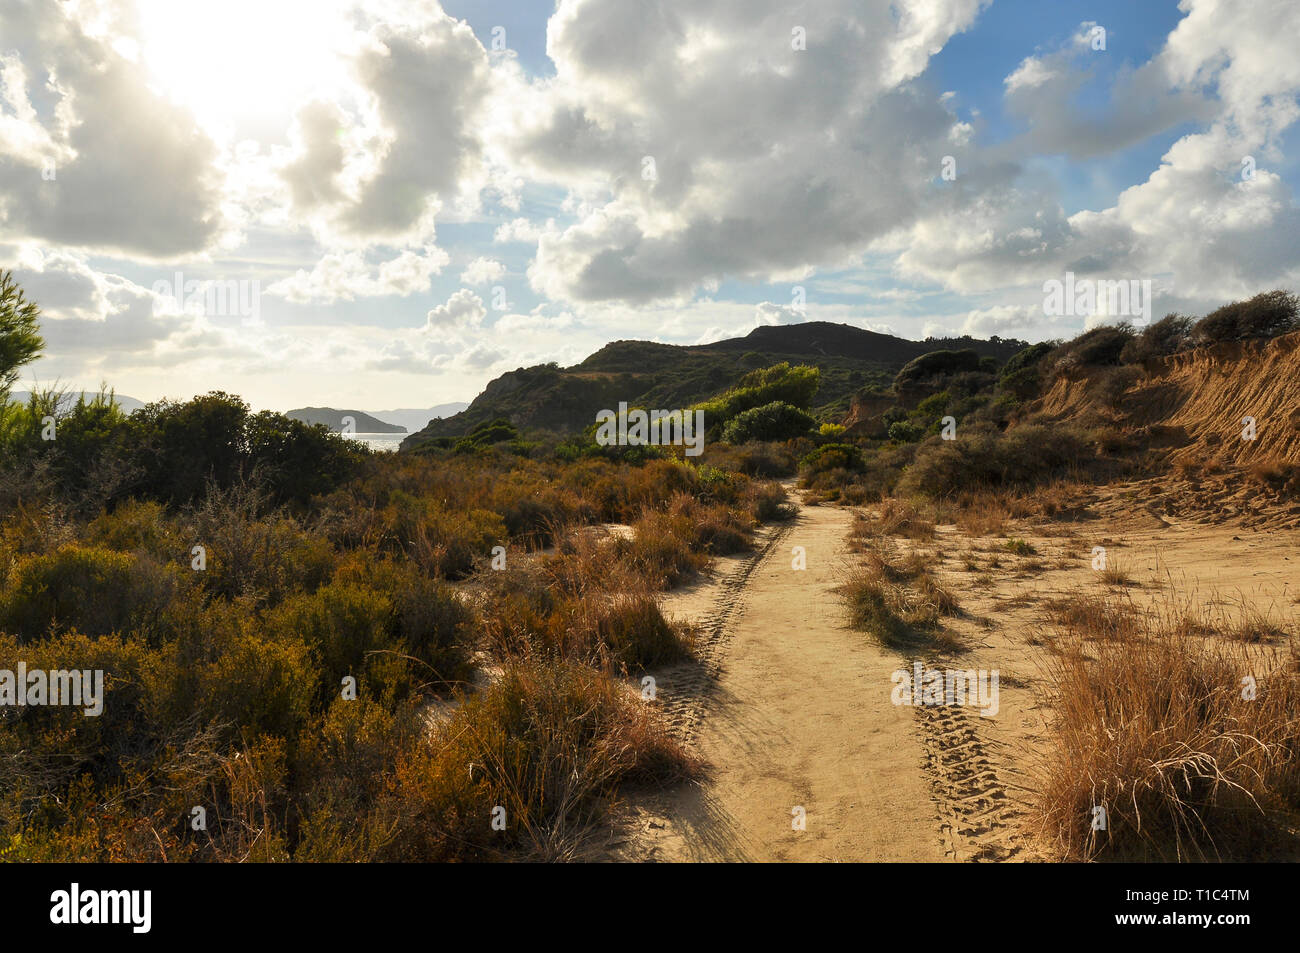 Pathway on sandy dunes between thickets vegetation with view on mountains, island and sea on horizon. Fading tire traces of car on the sand. Stock Photo